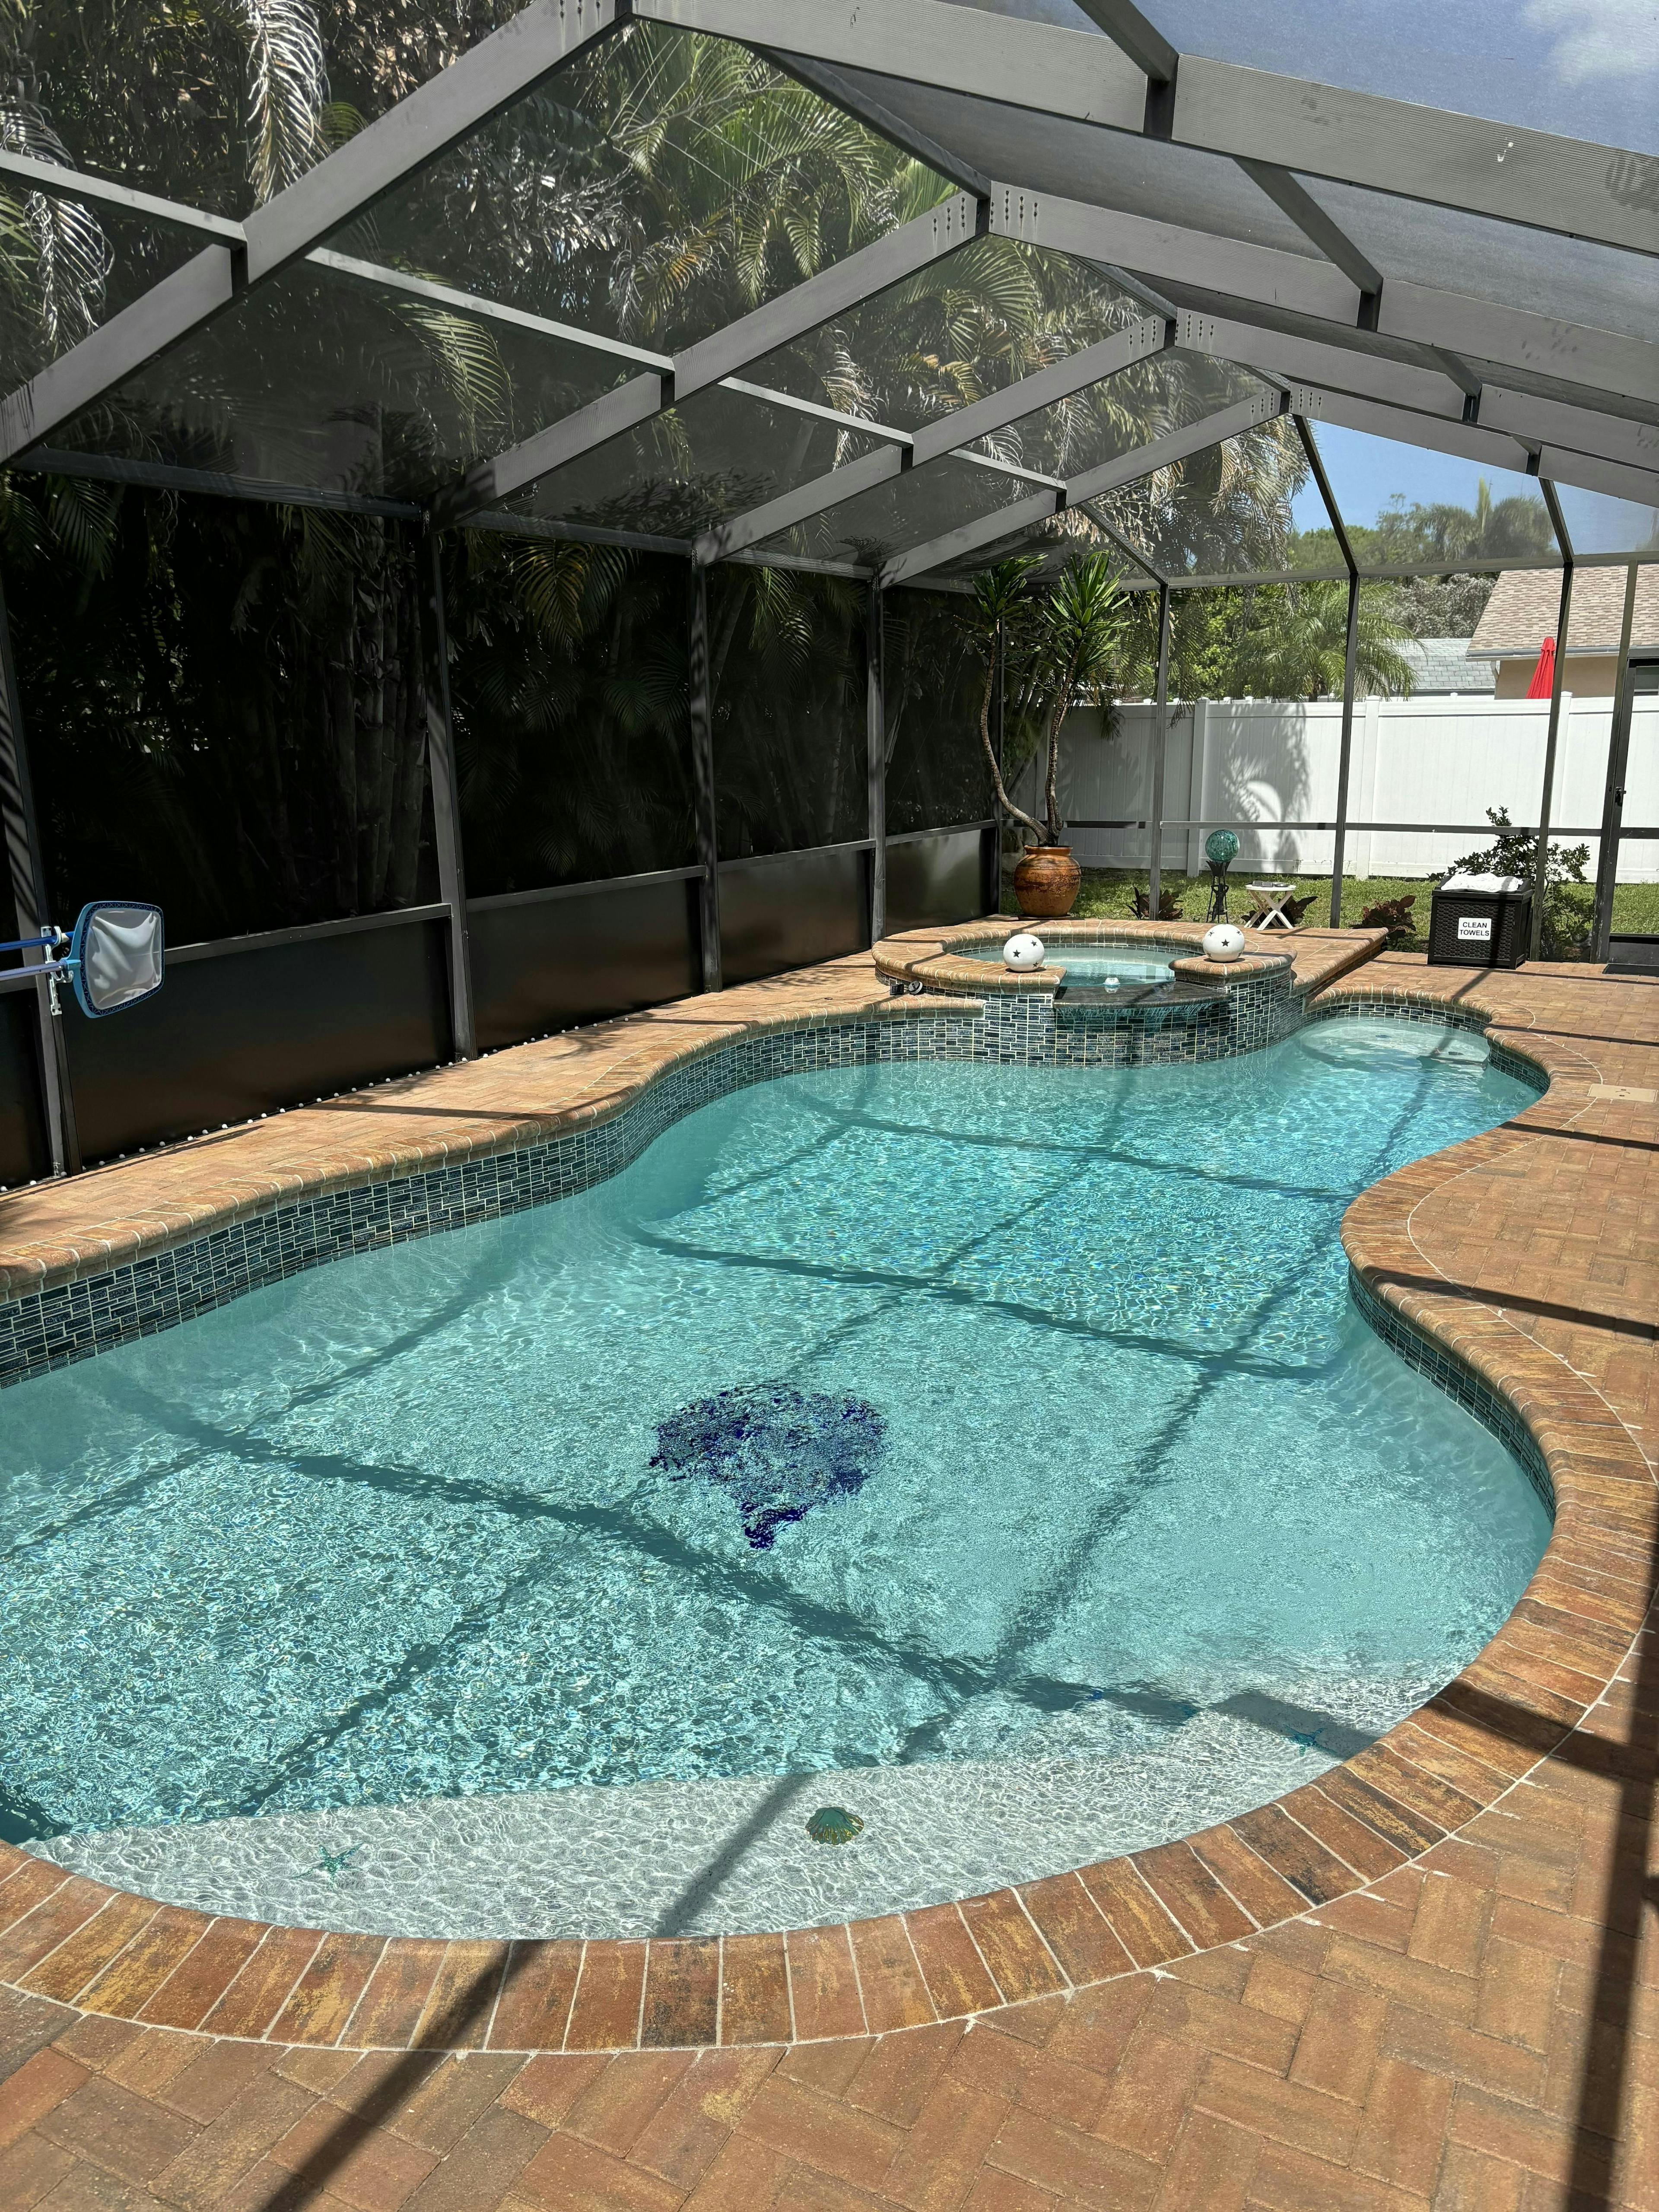 Largo Oasis Pool And Heated Spa Experience In Tropical Surroundings!